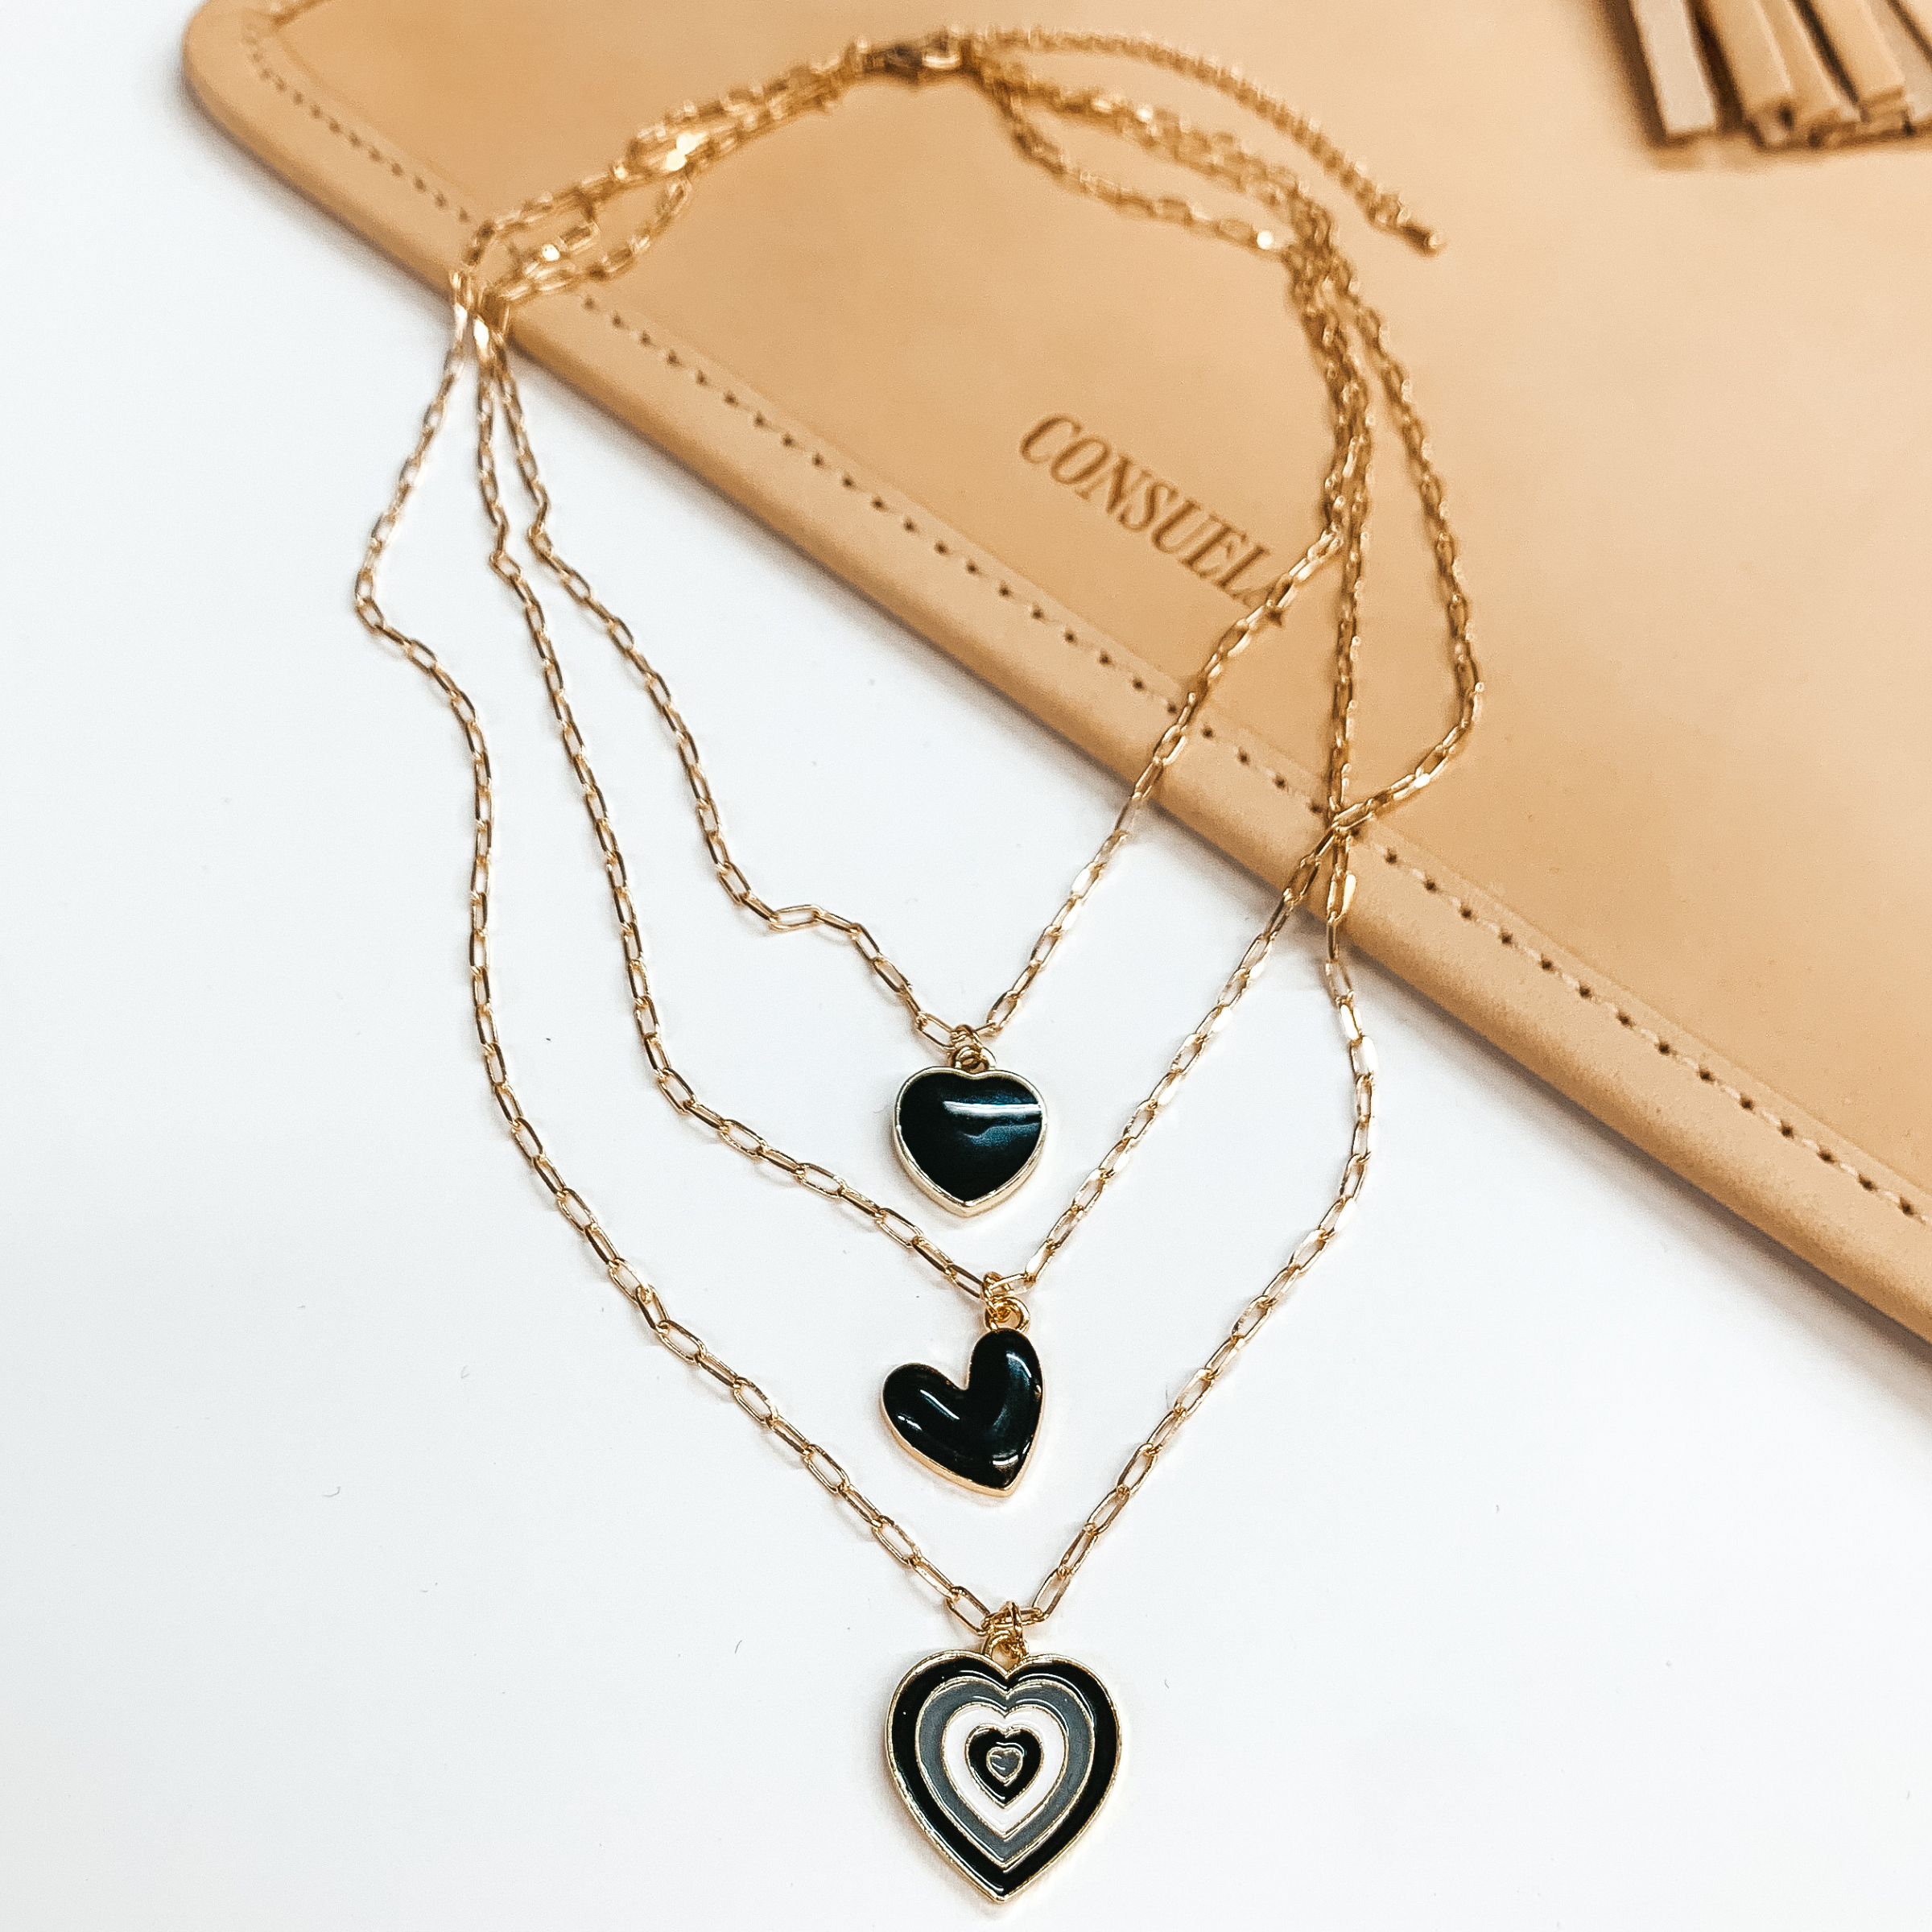 Three Strand Gold Multi Chain Necklace with Black and White Heart Charms